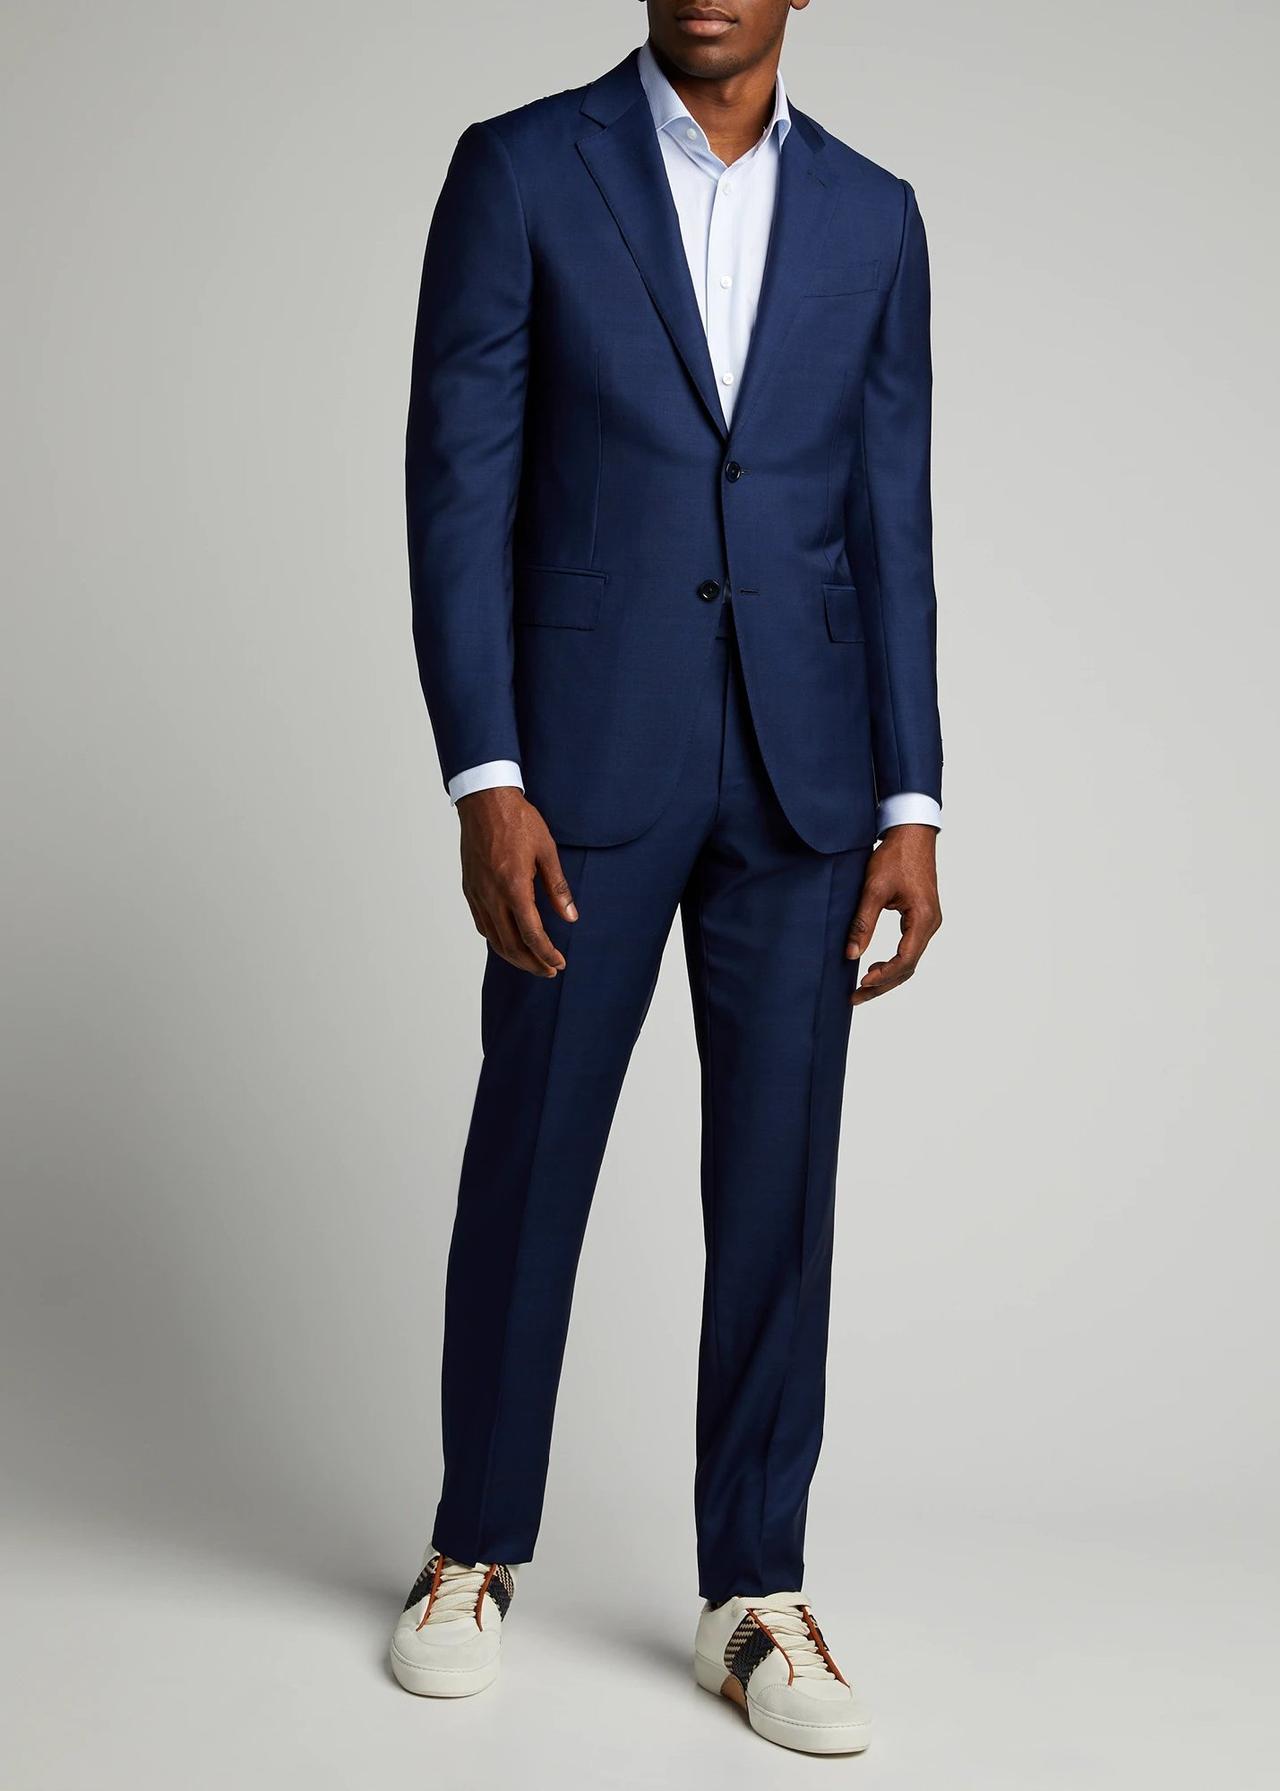 Elevate Your Style with Our 3 Piece Executive Classic Navy Blue Suit |  Eaden Myles Clothing Company